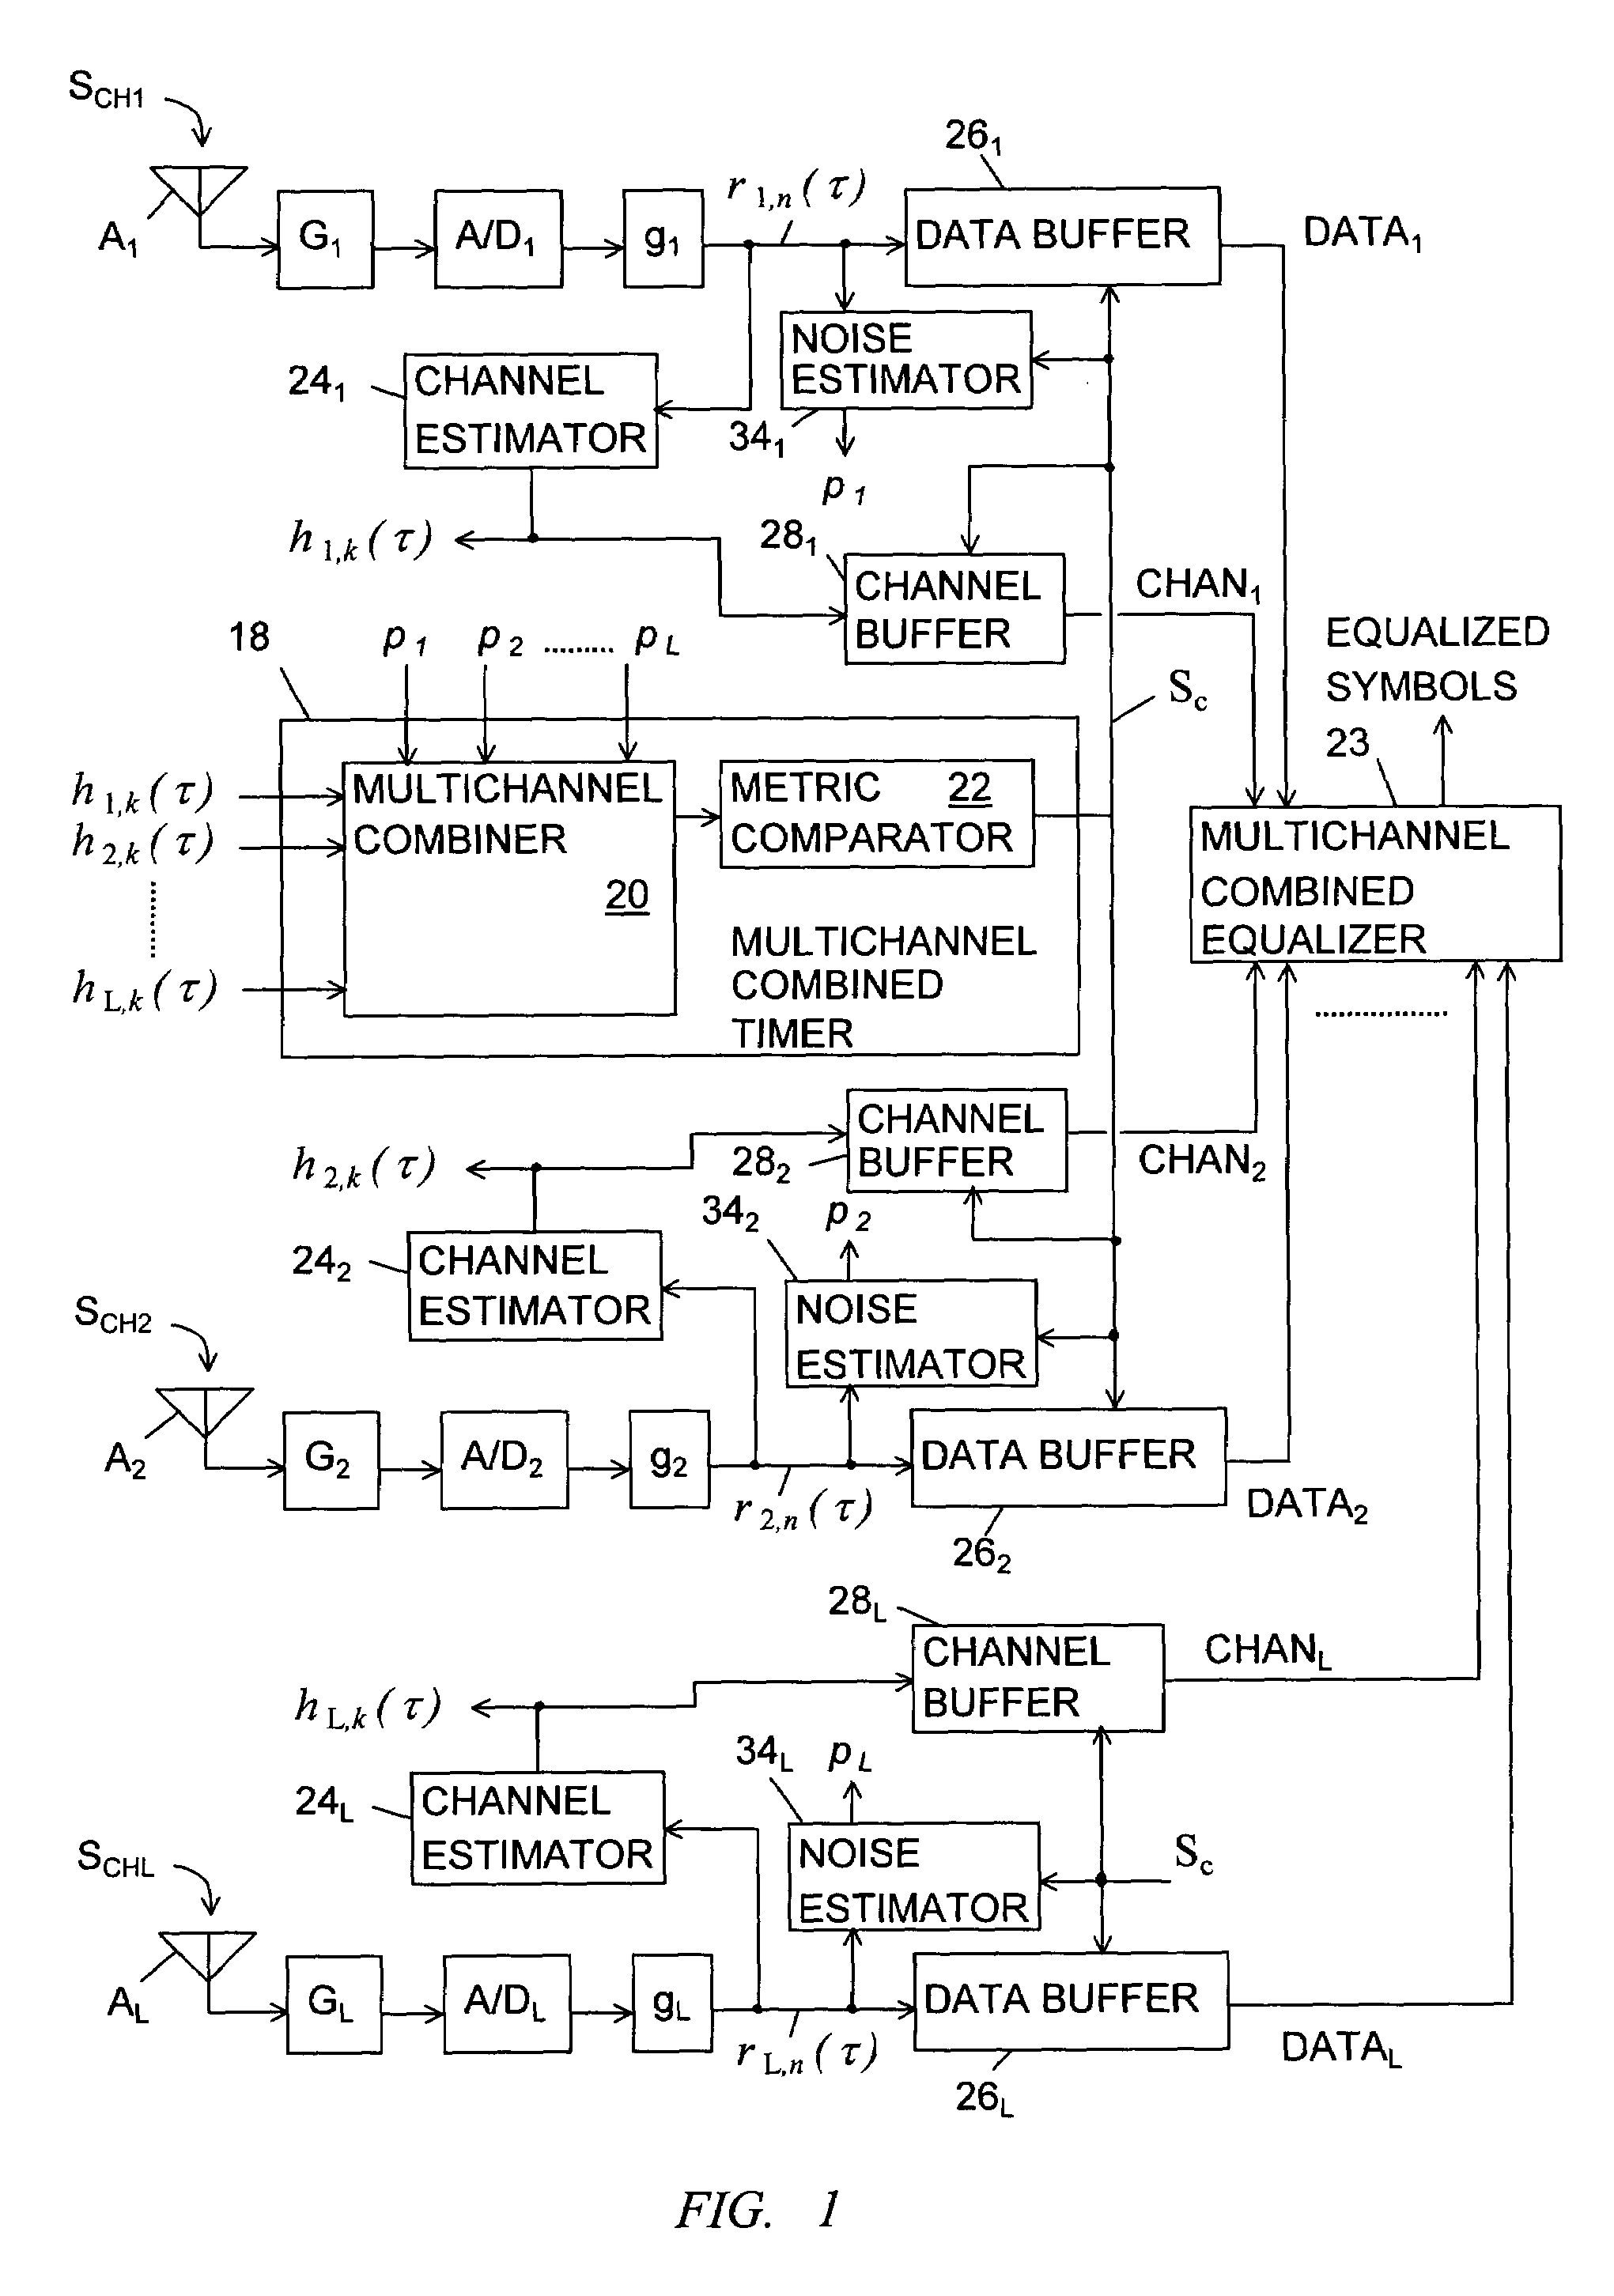 Joint timing recovery for multiple signal channels